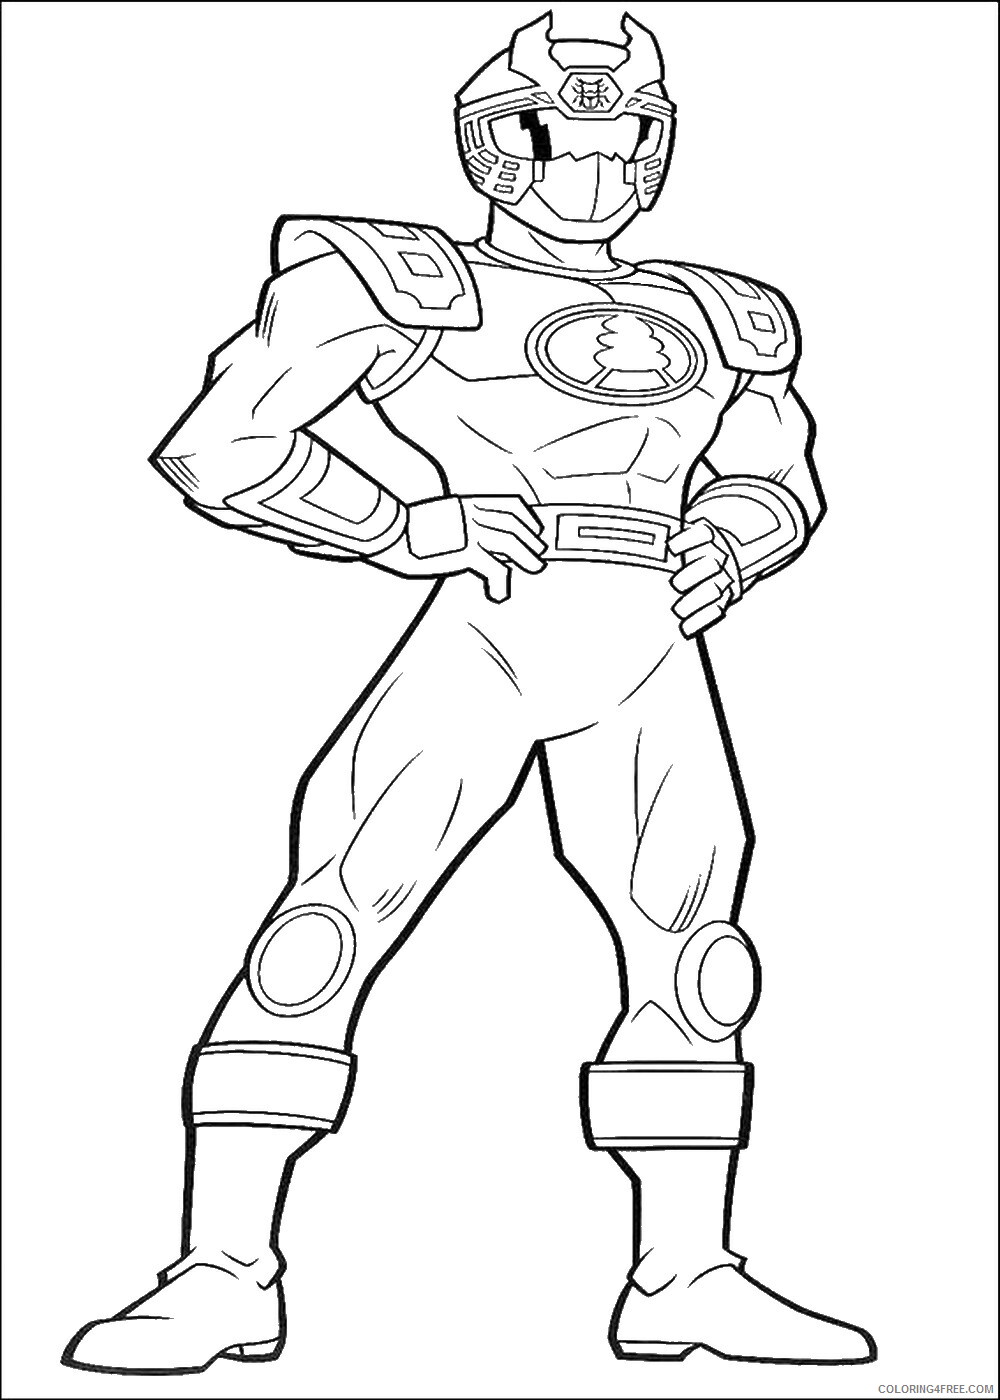 Power Rangers Coloring Pages TV Film power_rangers8 Printable 2020 06703 Coloring4free